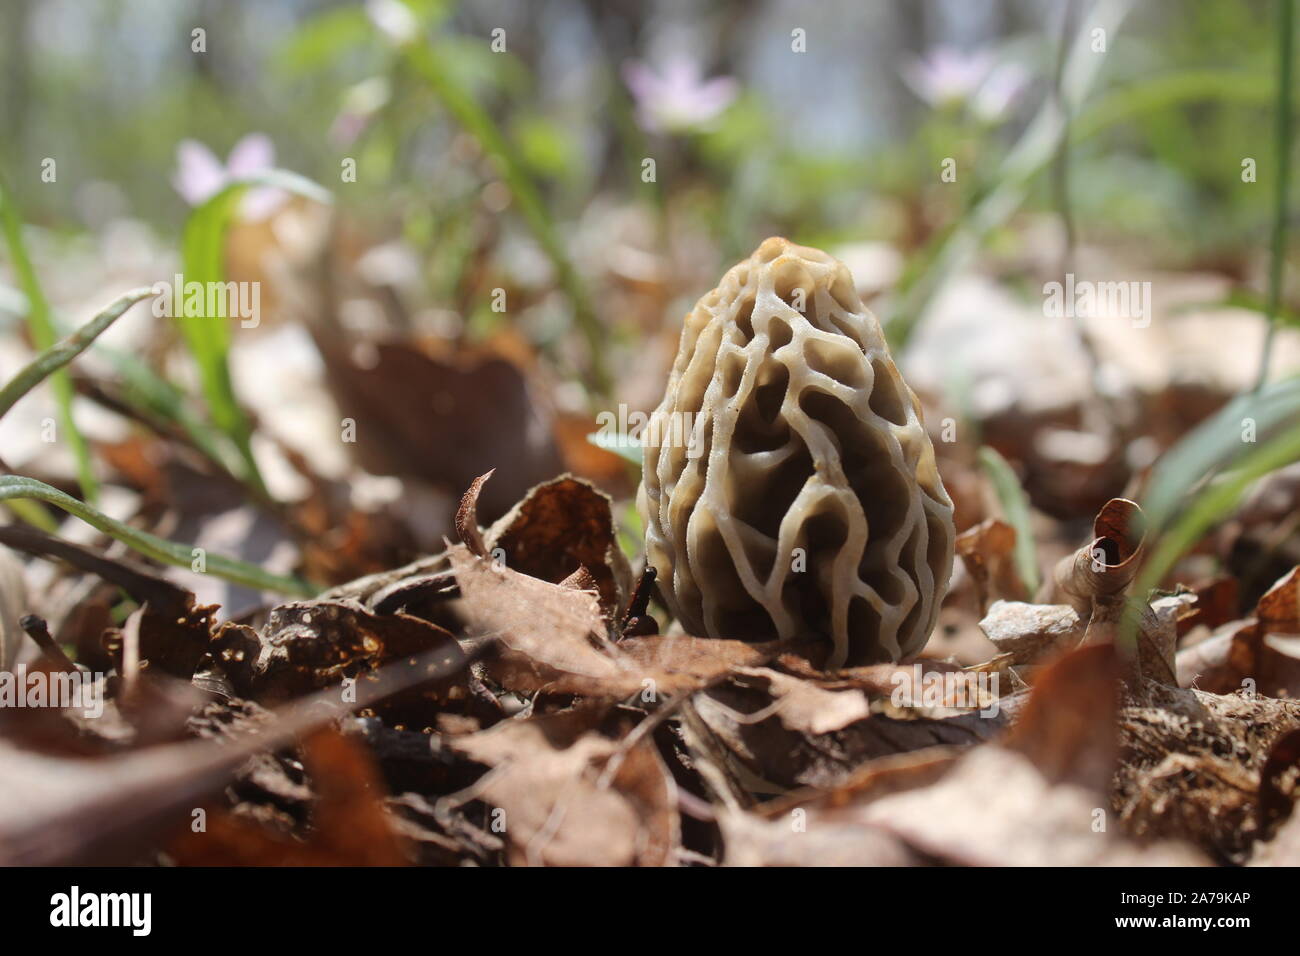 Morel mushroom growing on the forest floor Stock Photo